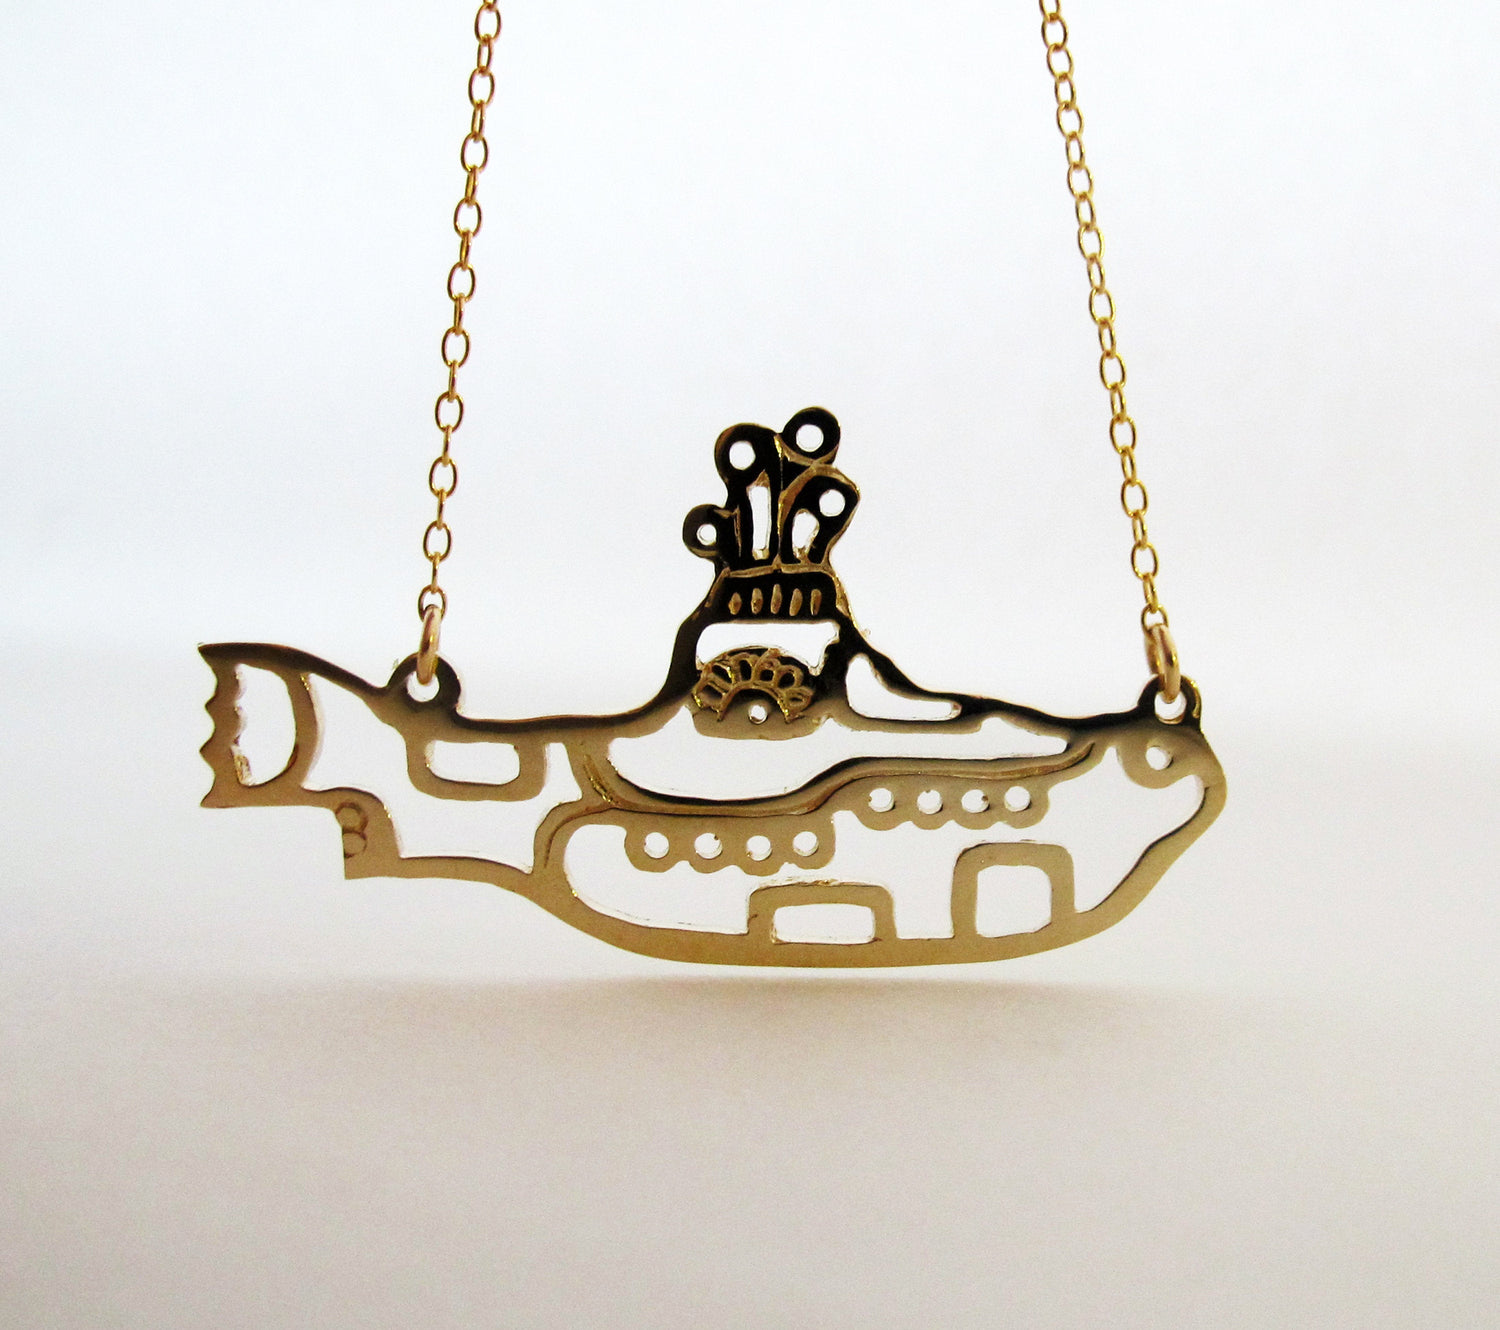 Submarine Necklace - Memorabilia Psychedelic Song Music Jewellery Collectible Cutout Kitsch Gold Brass Statement Retro British Youth 137